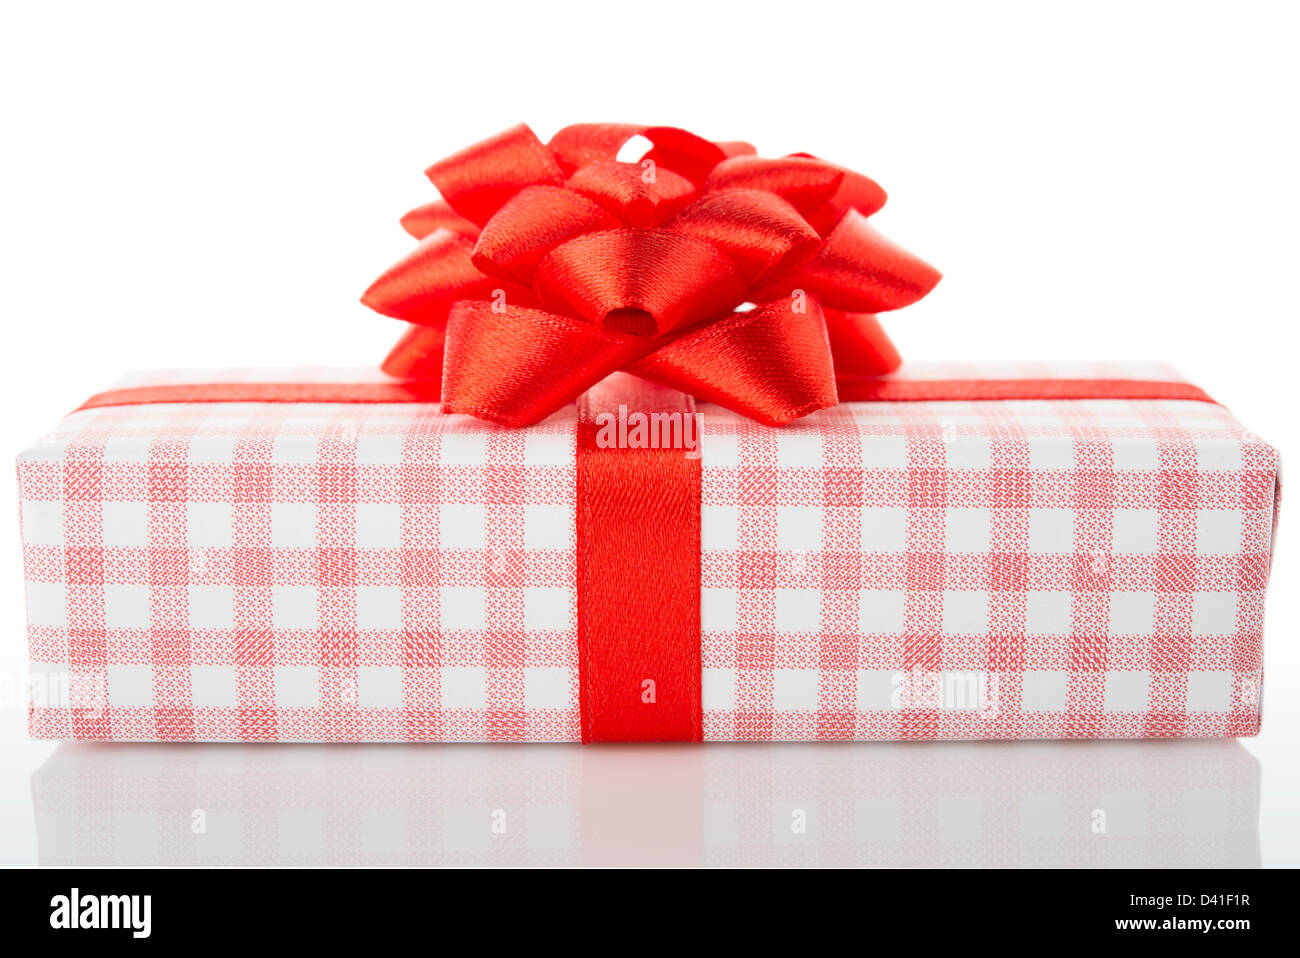 Vintage gift box with red bow, isolé sur fond blanc Banque D'Images